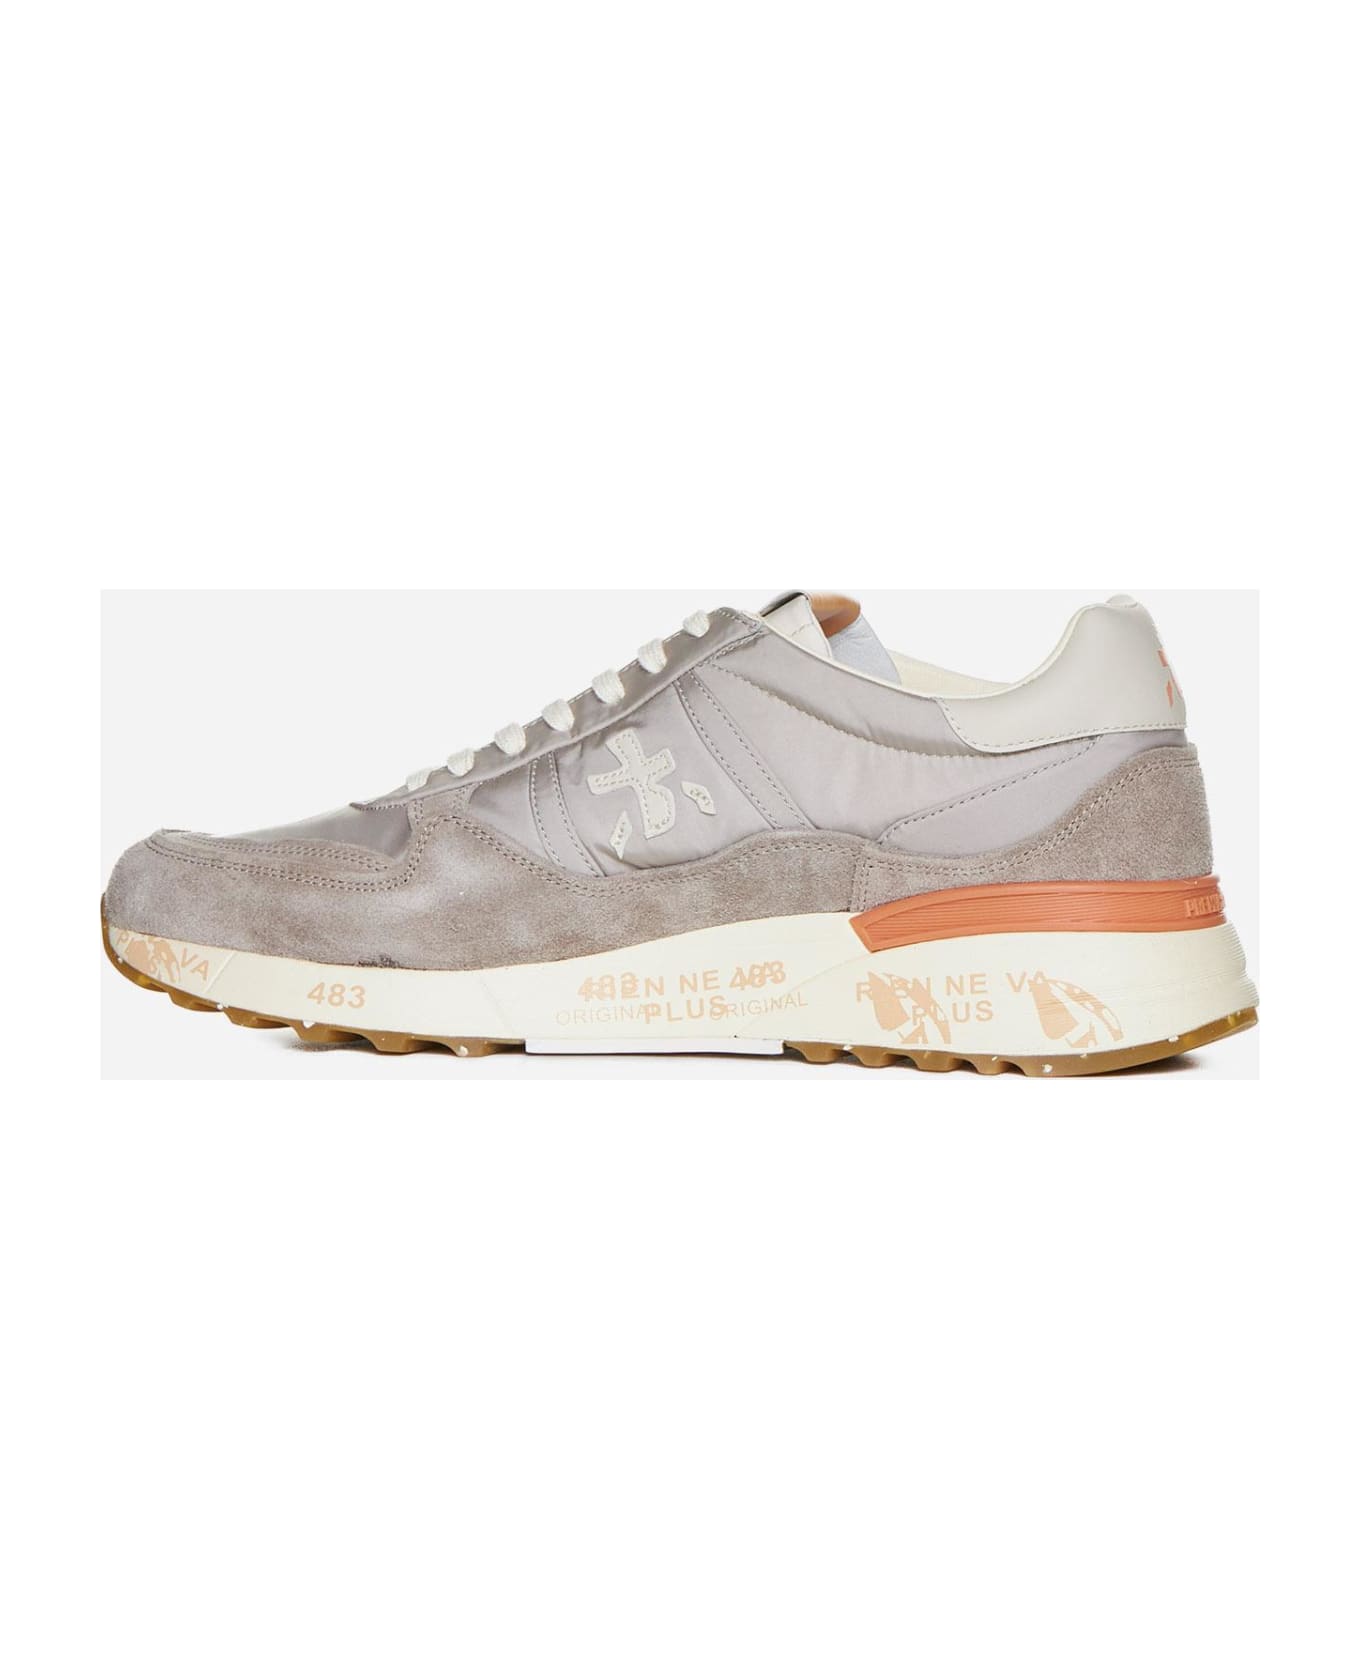 Premiata Landeck Leather, Nylon And Suede Sneakers - Grey スニーカー